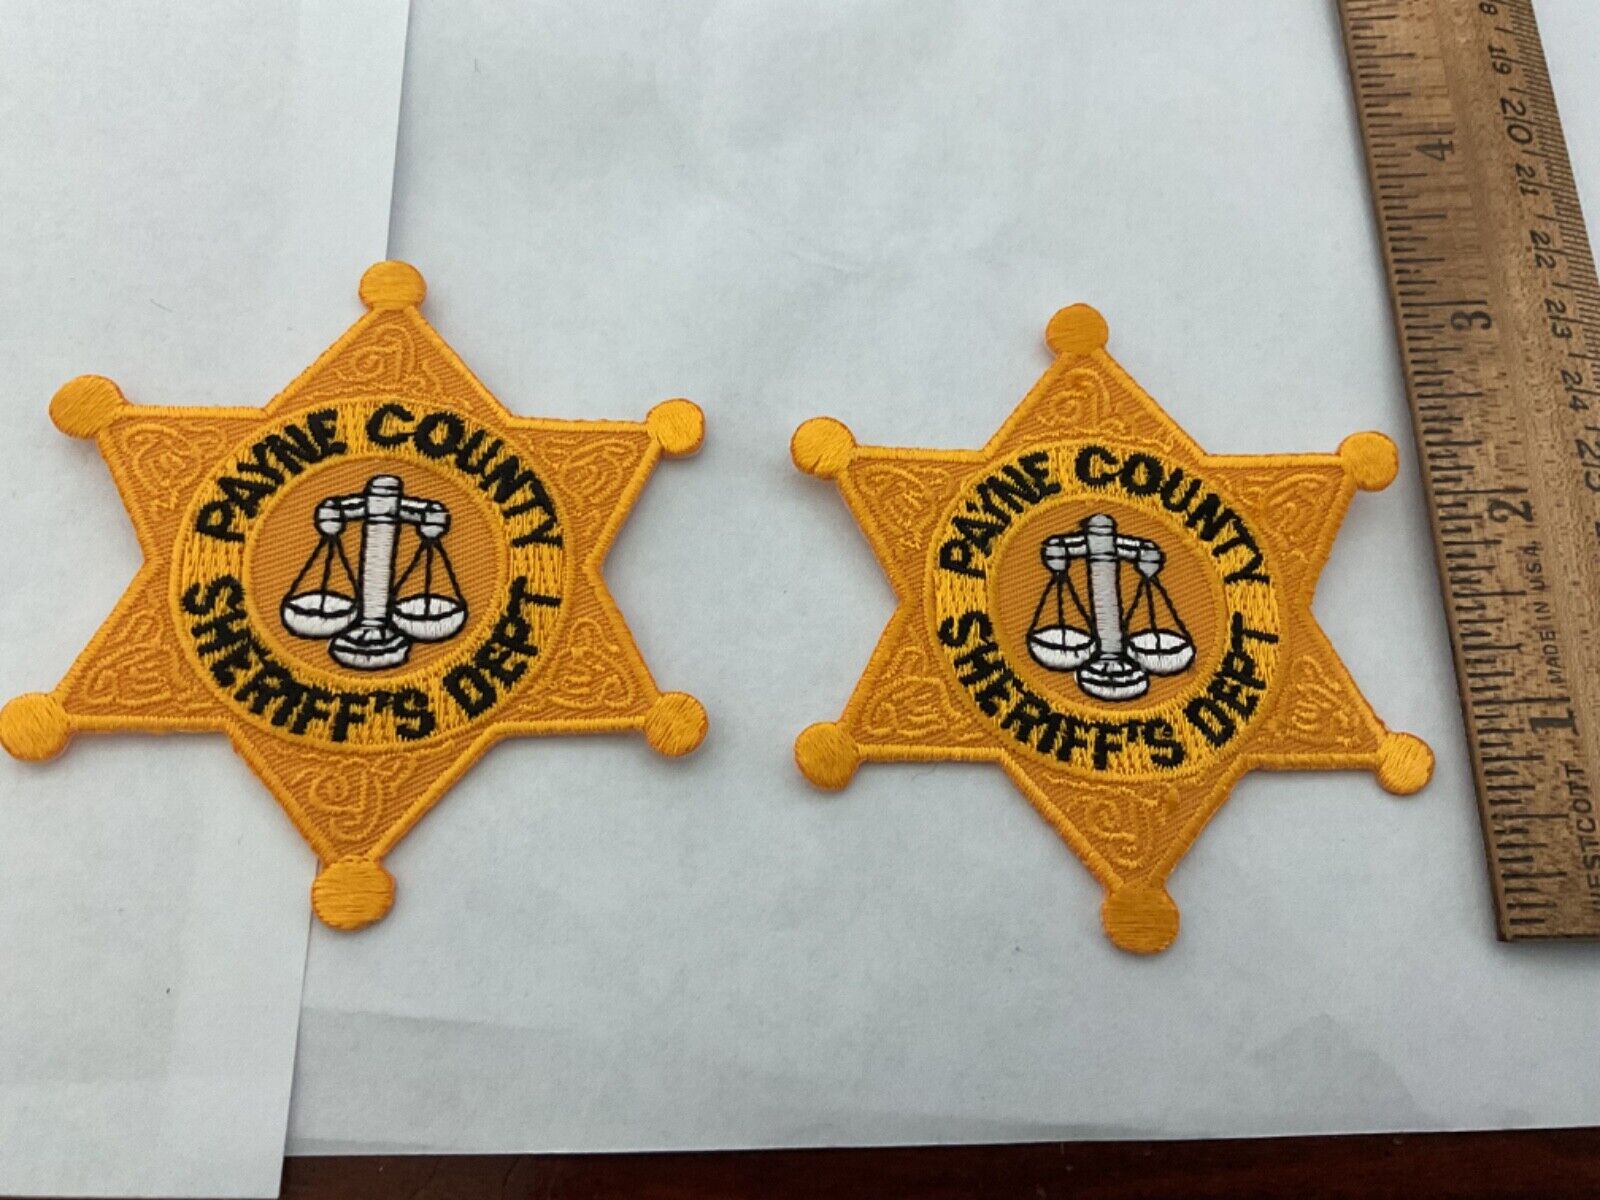 Payne County Sheriff’s Dept. collectable patches 2 piece